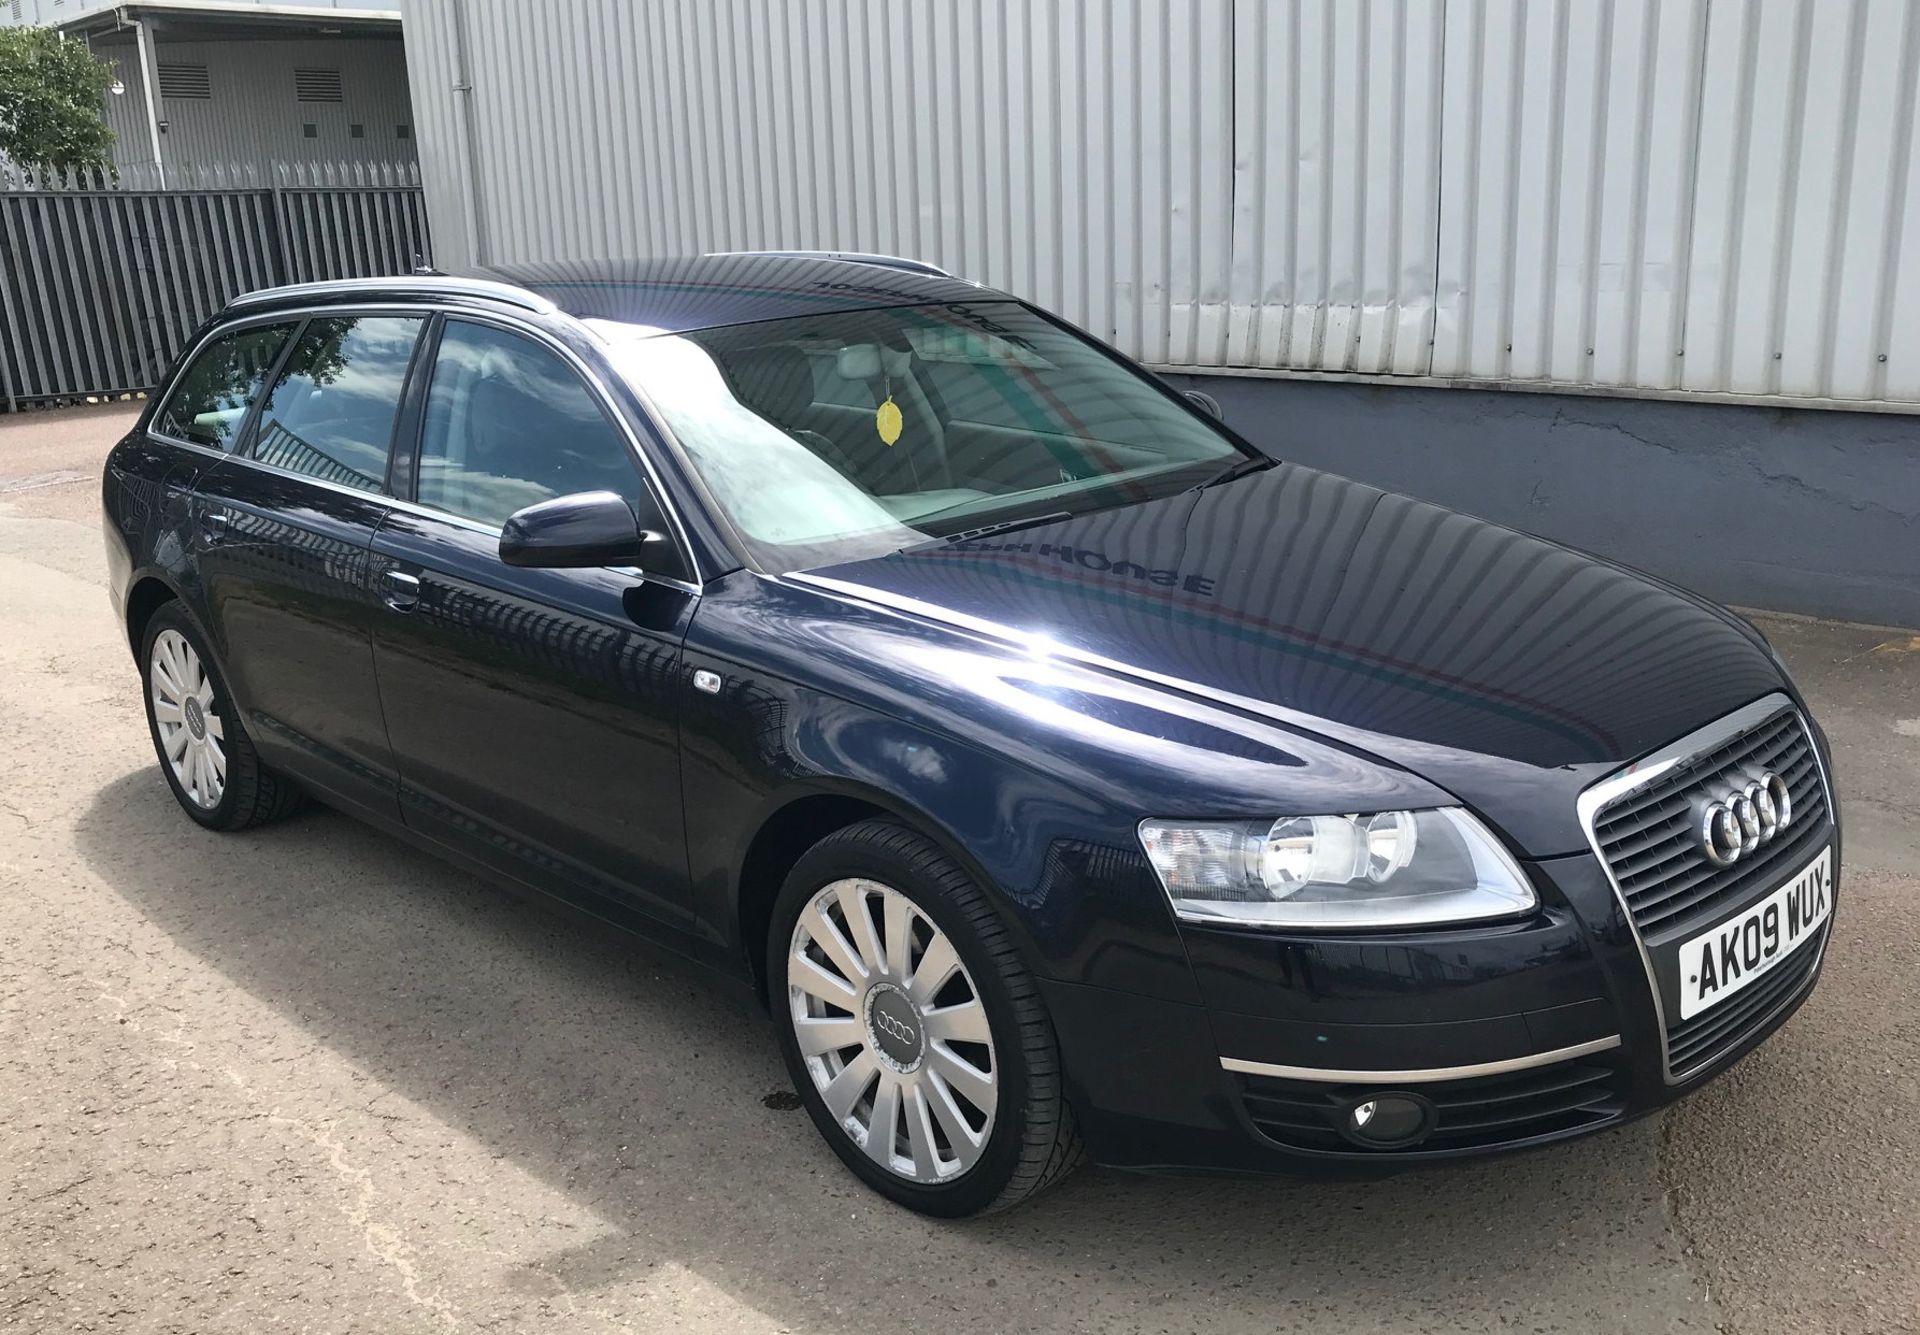 2009 Audi A6 2.0 Tdi Le 5 Door Estate - CL505 - NO VAT ON THE HAMMER - Location: Corby, Northamptons